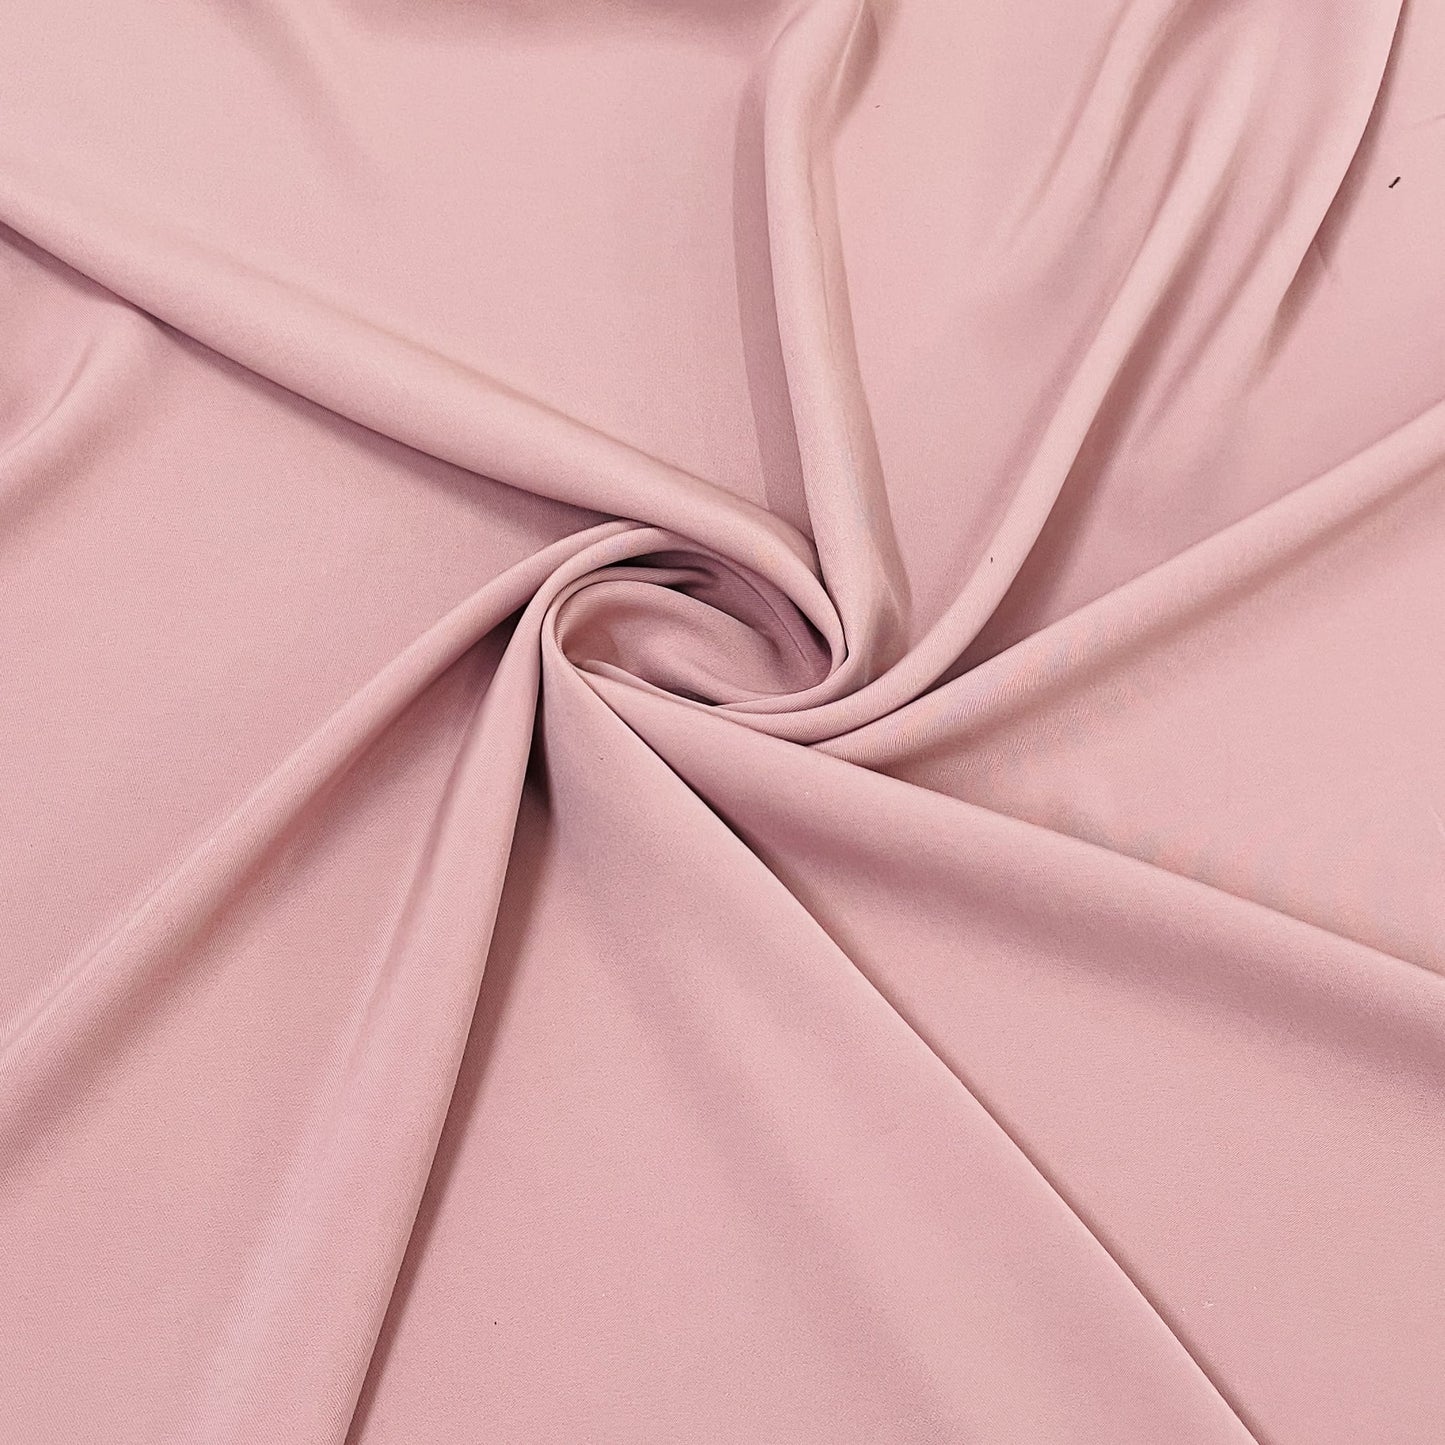 Exclusive Peach Pink Solid Satin Fabric